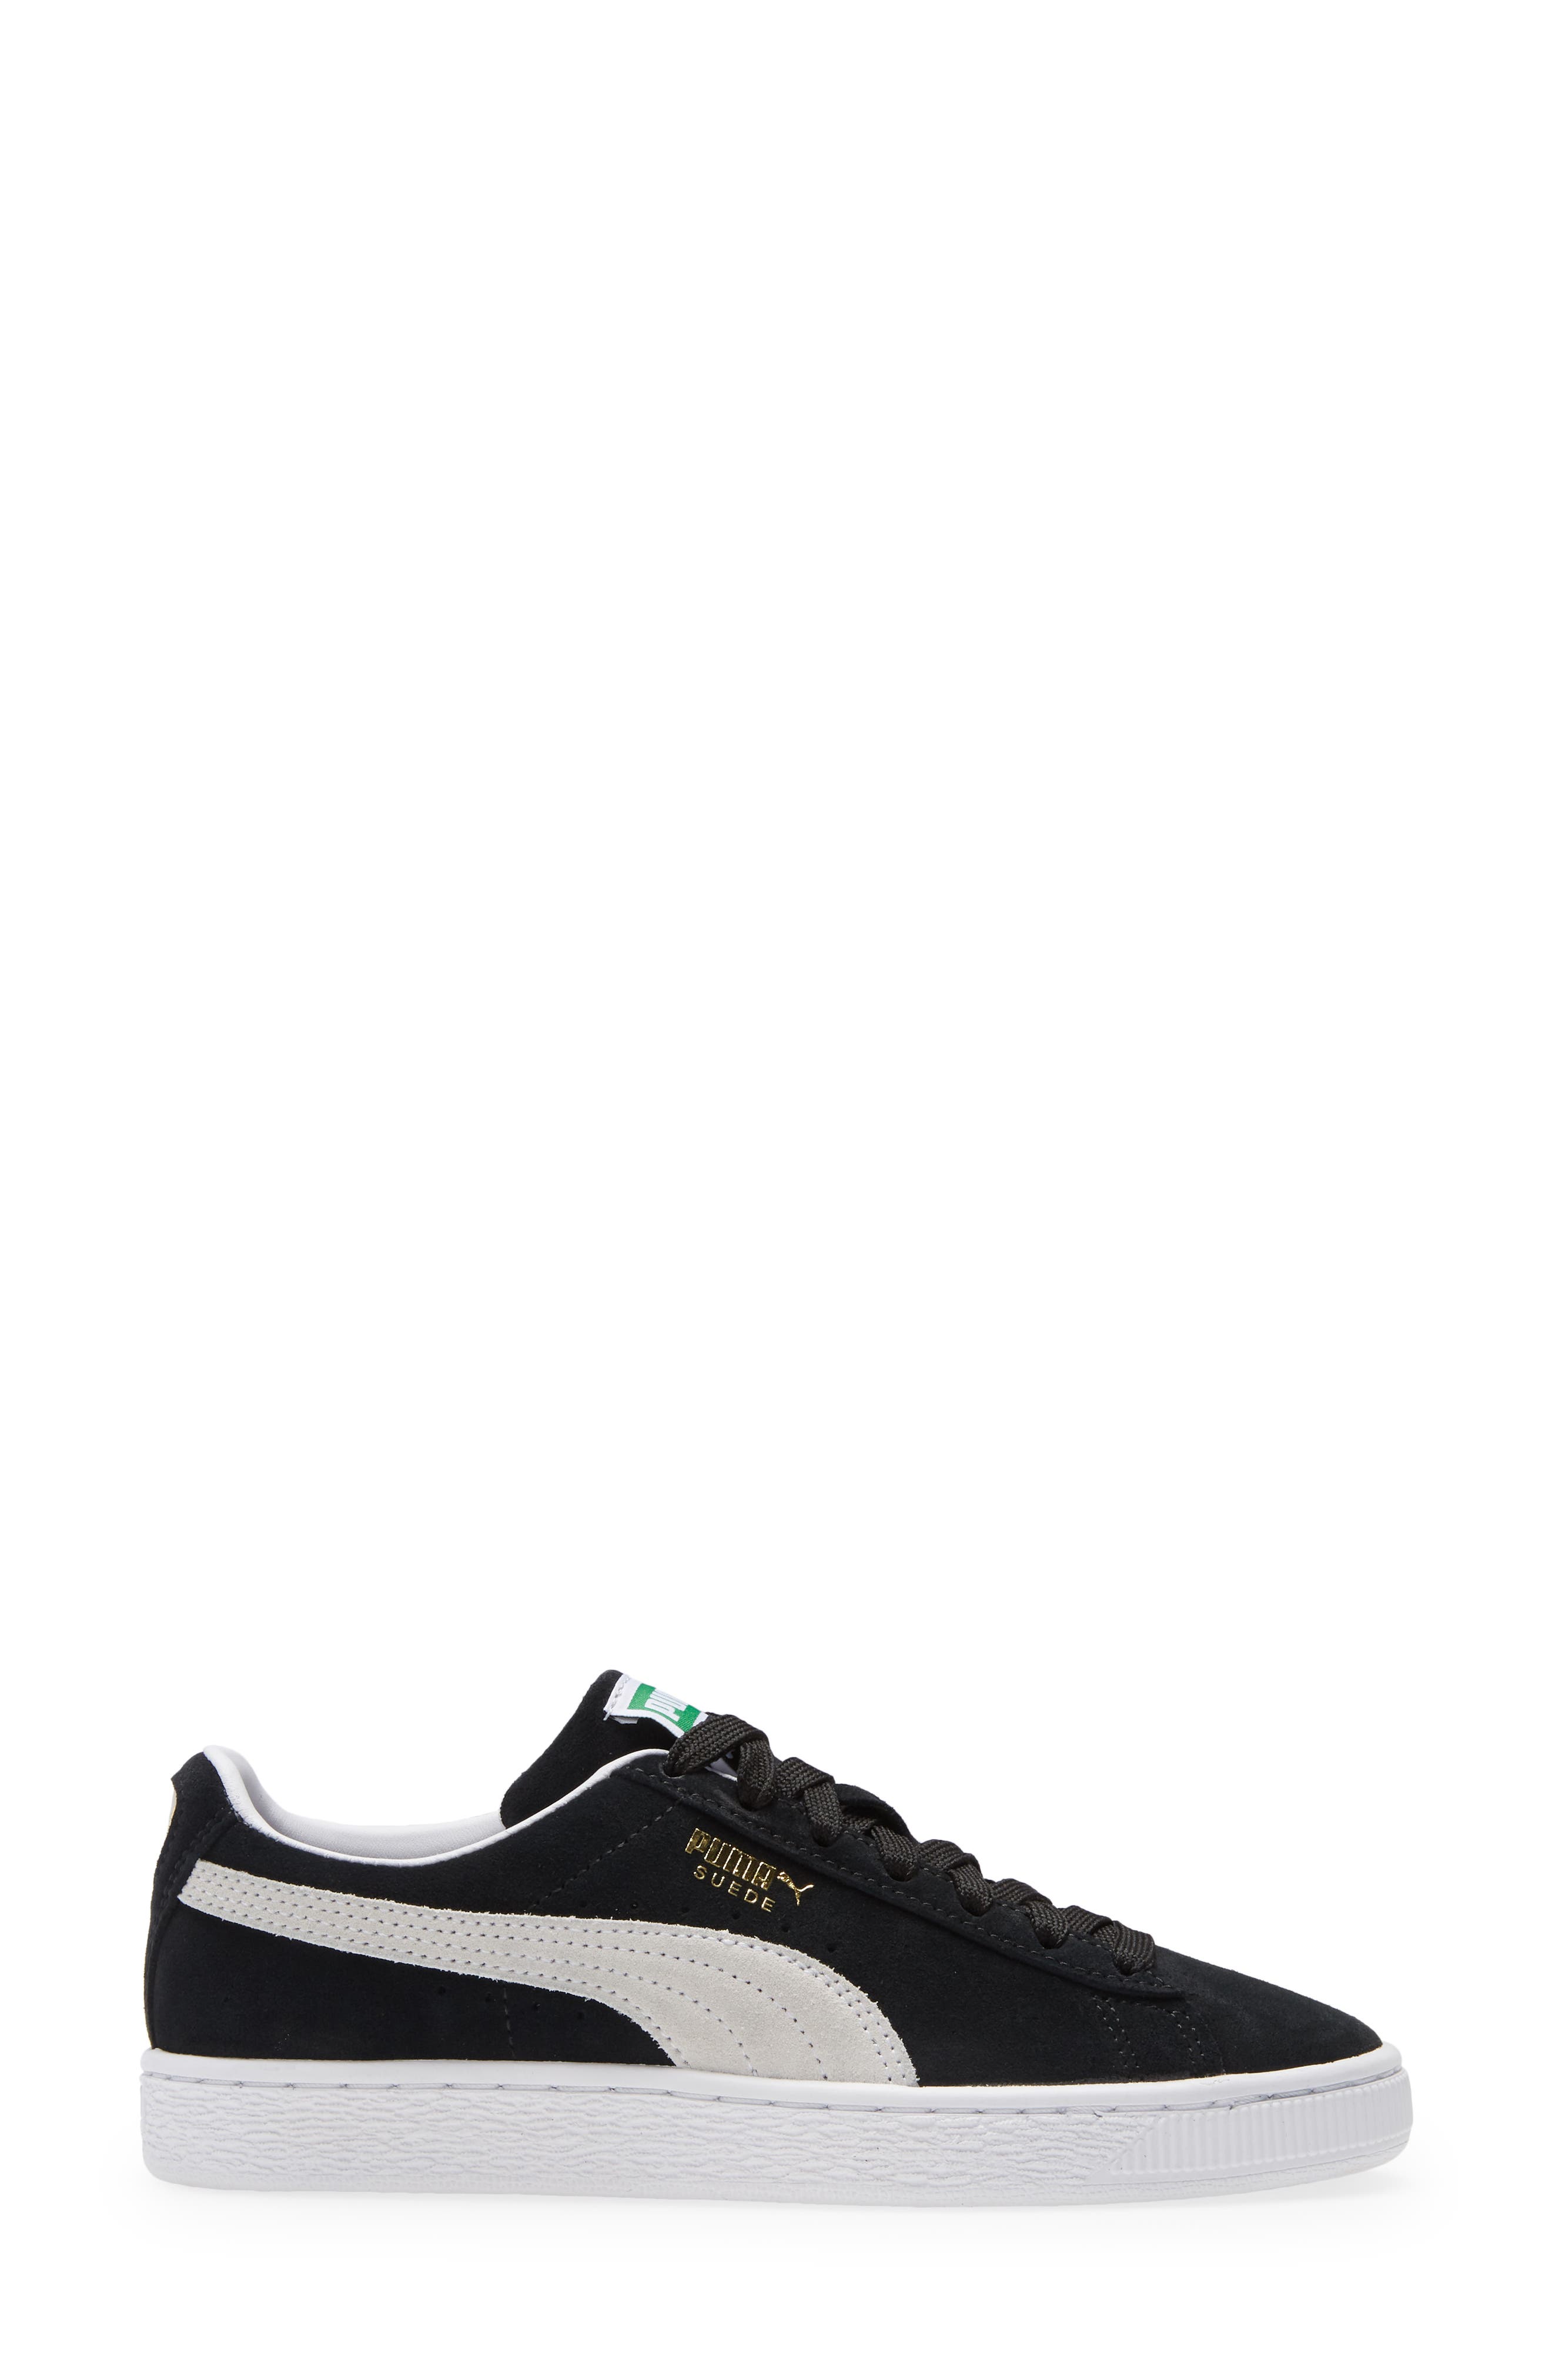 Puma Womens Suede Classic - Shoes Black/White Size 06.5